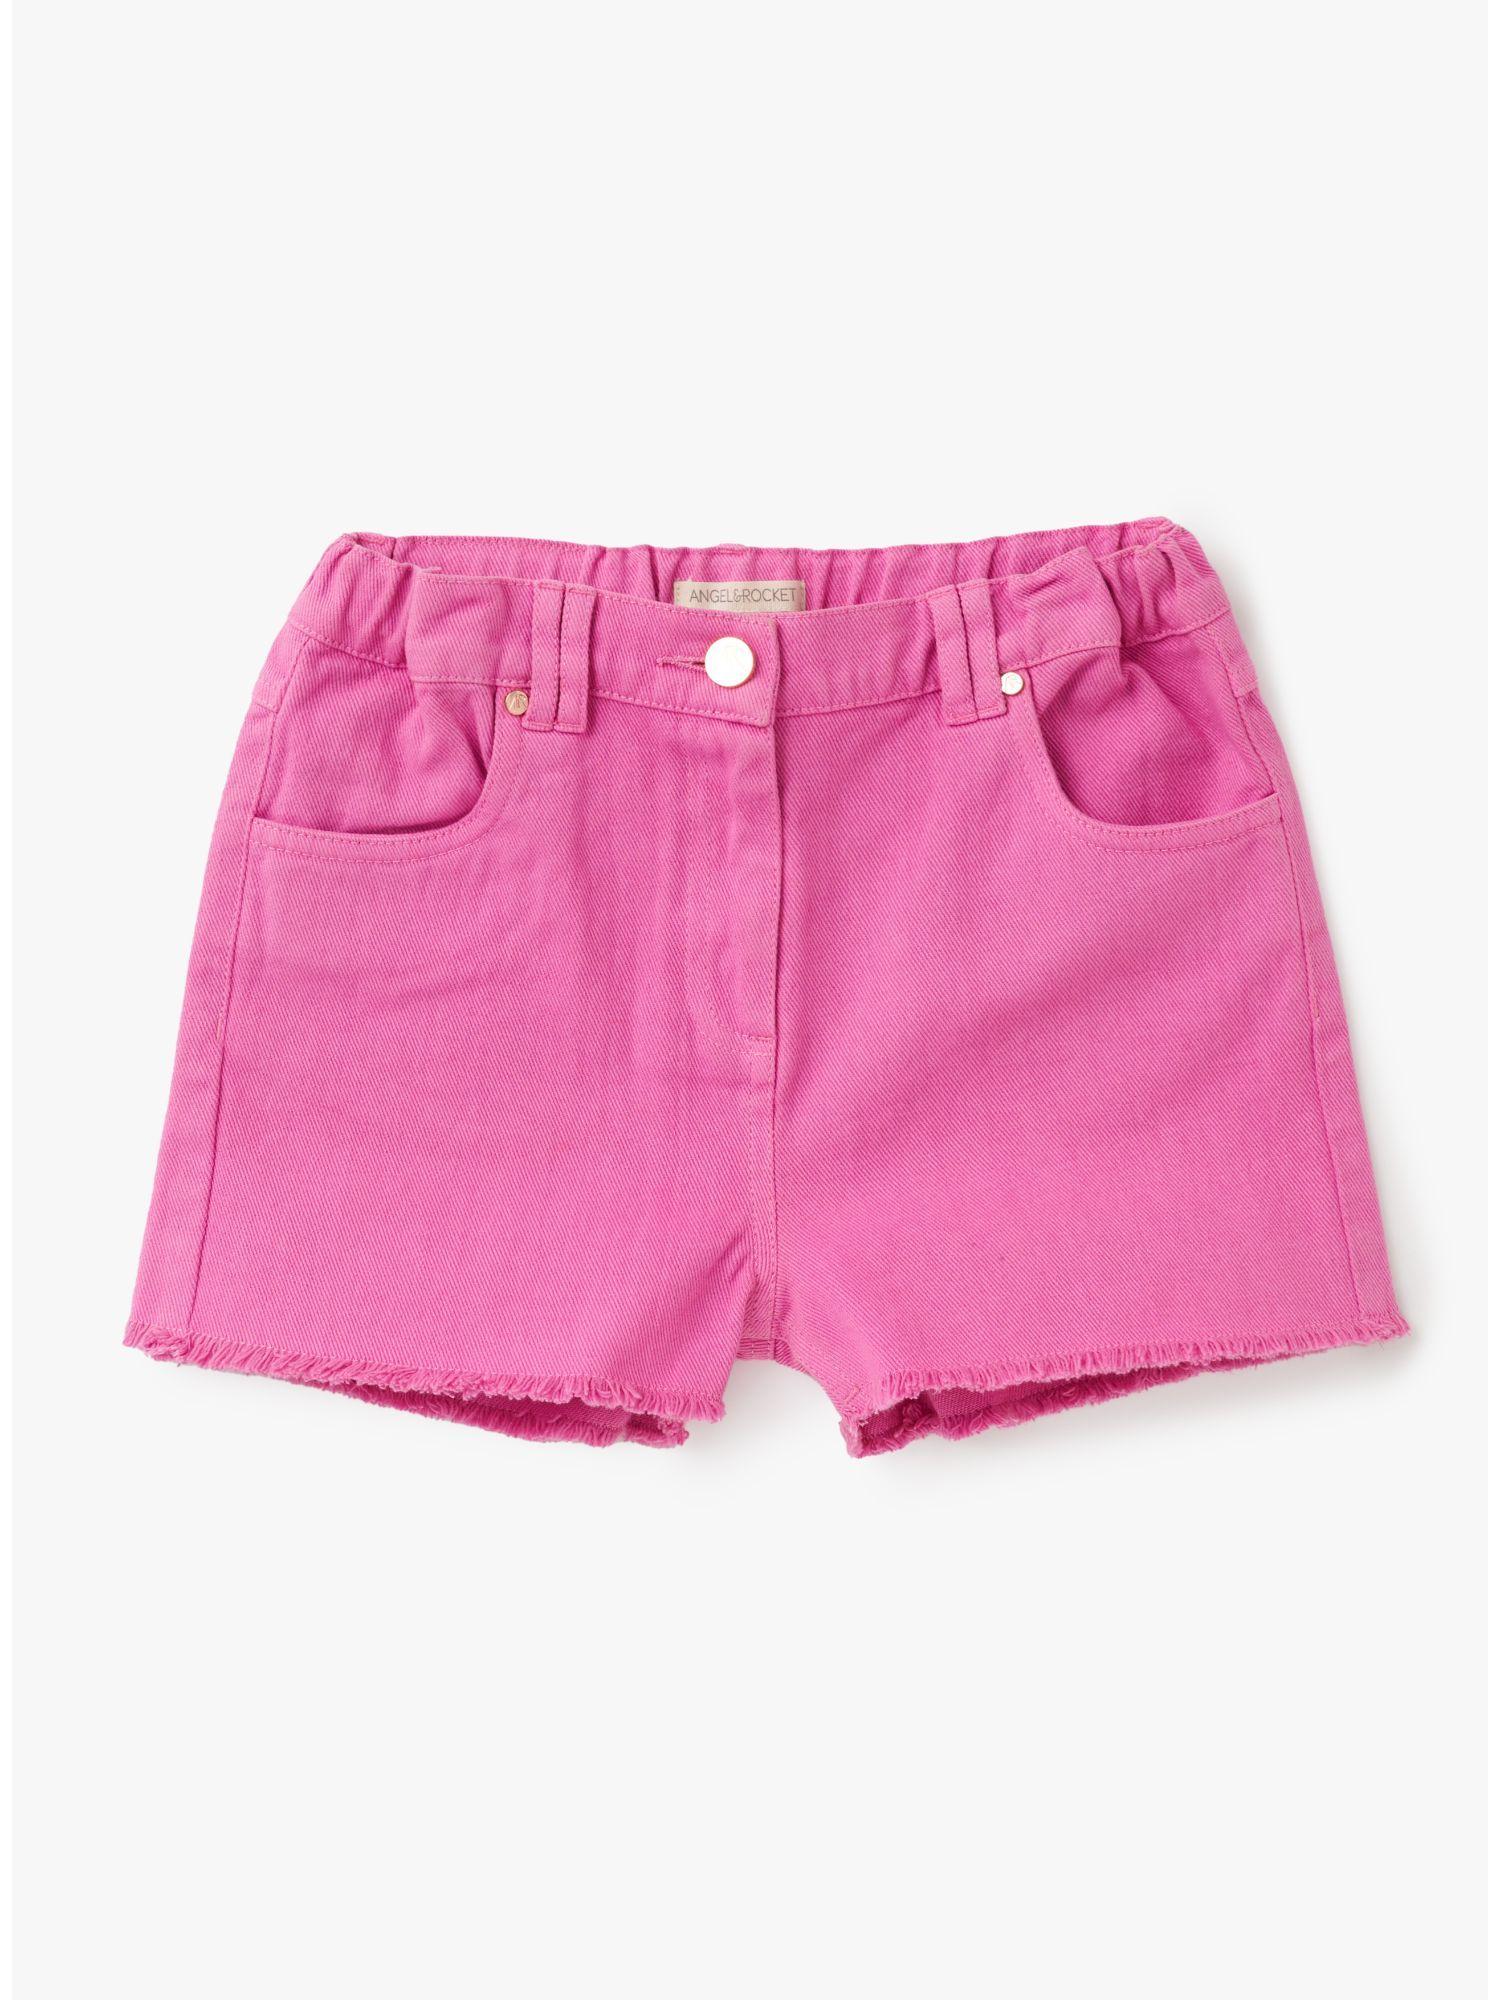 solid pink shorts